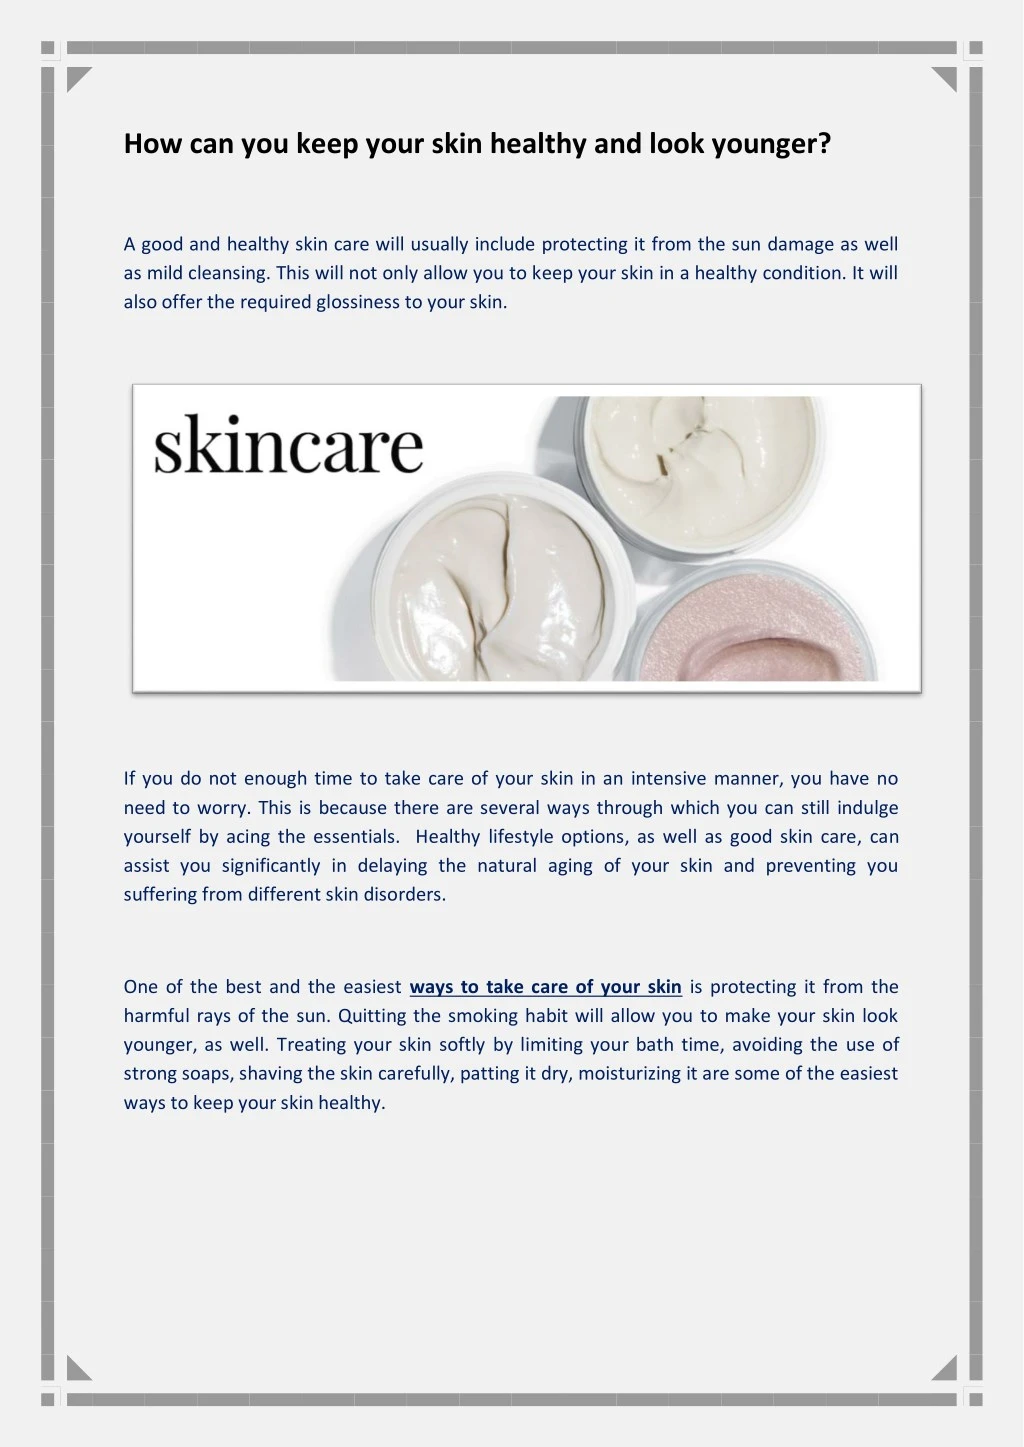 how can you keep your skin healthy and look